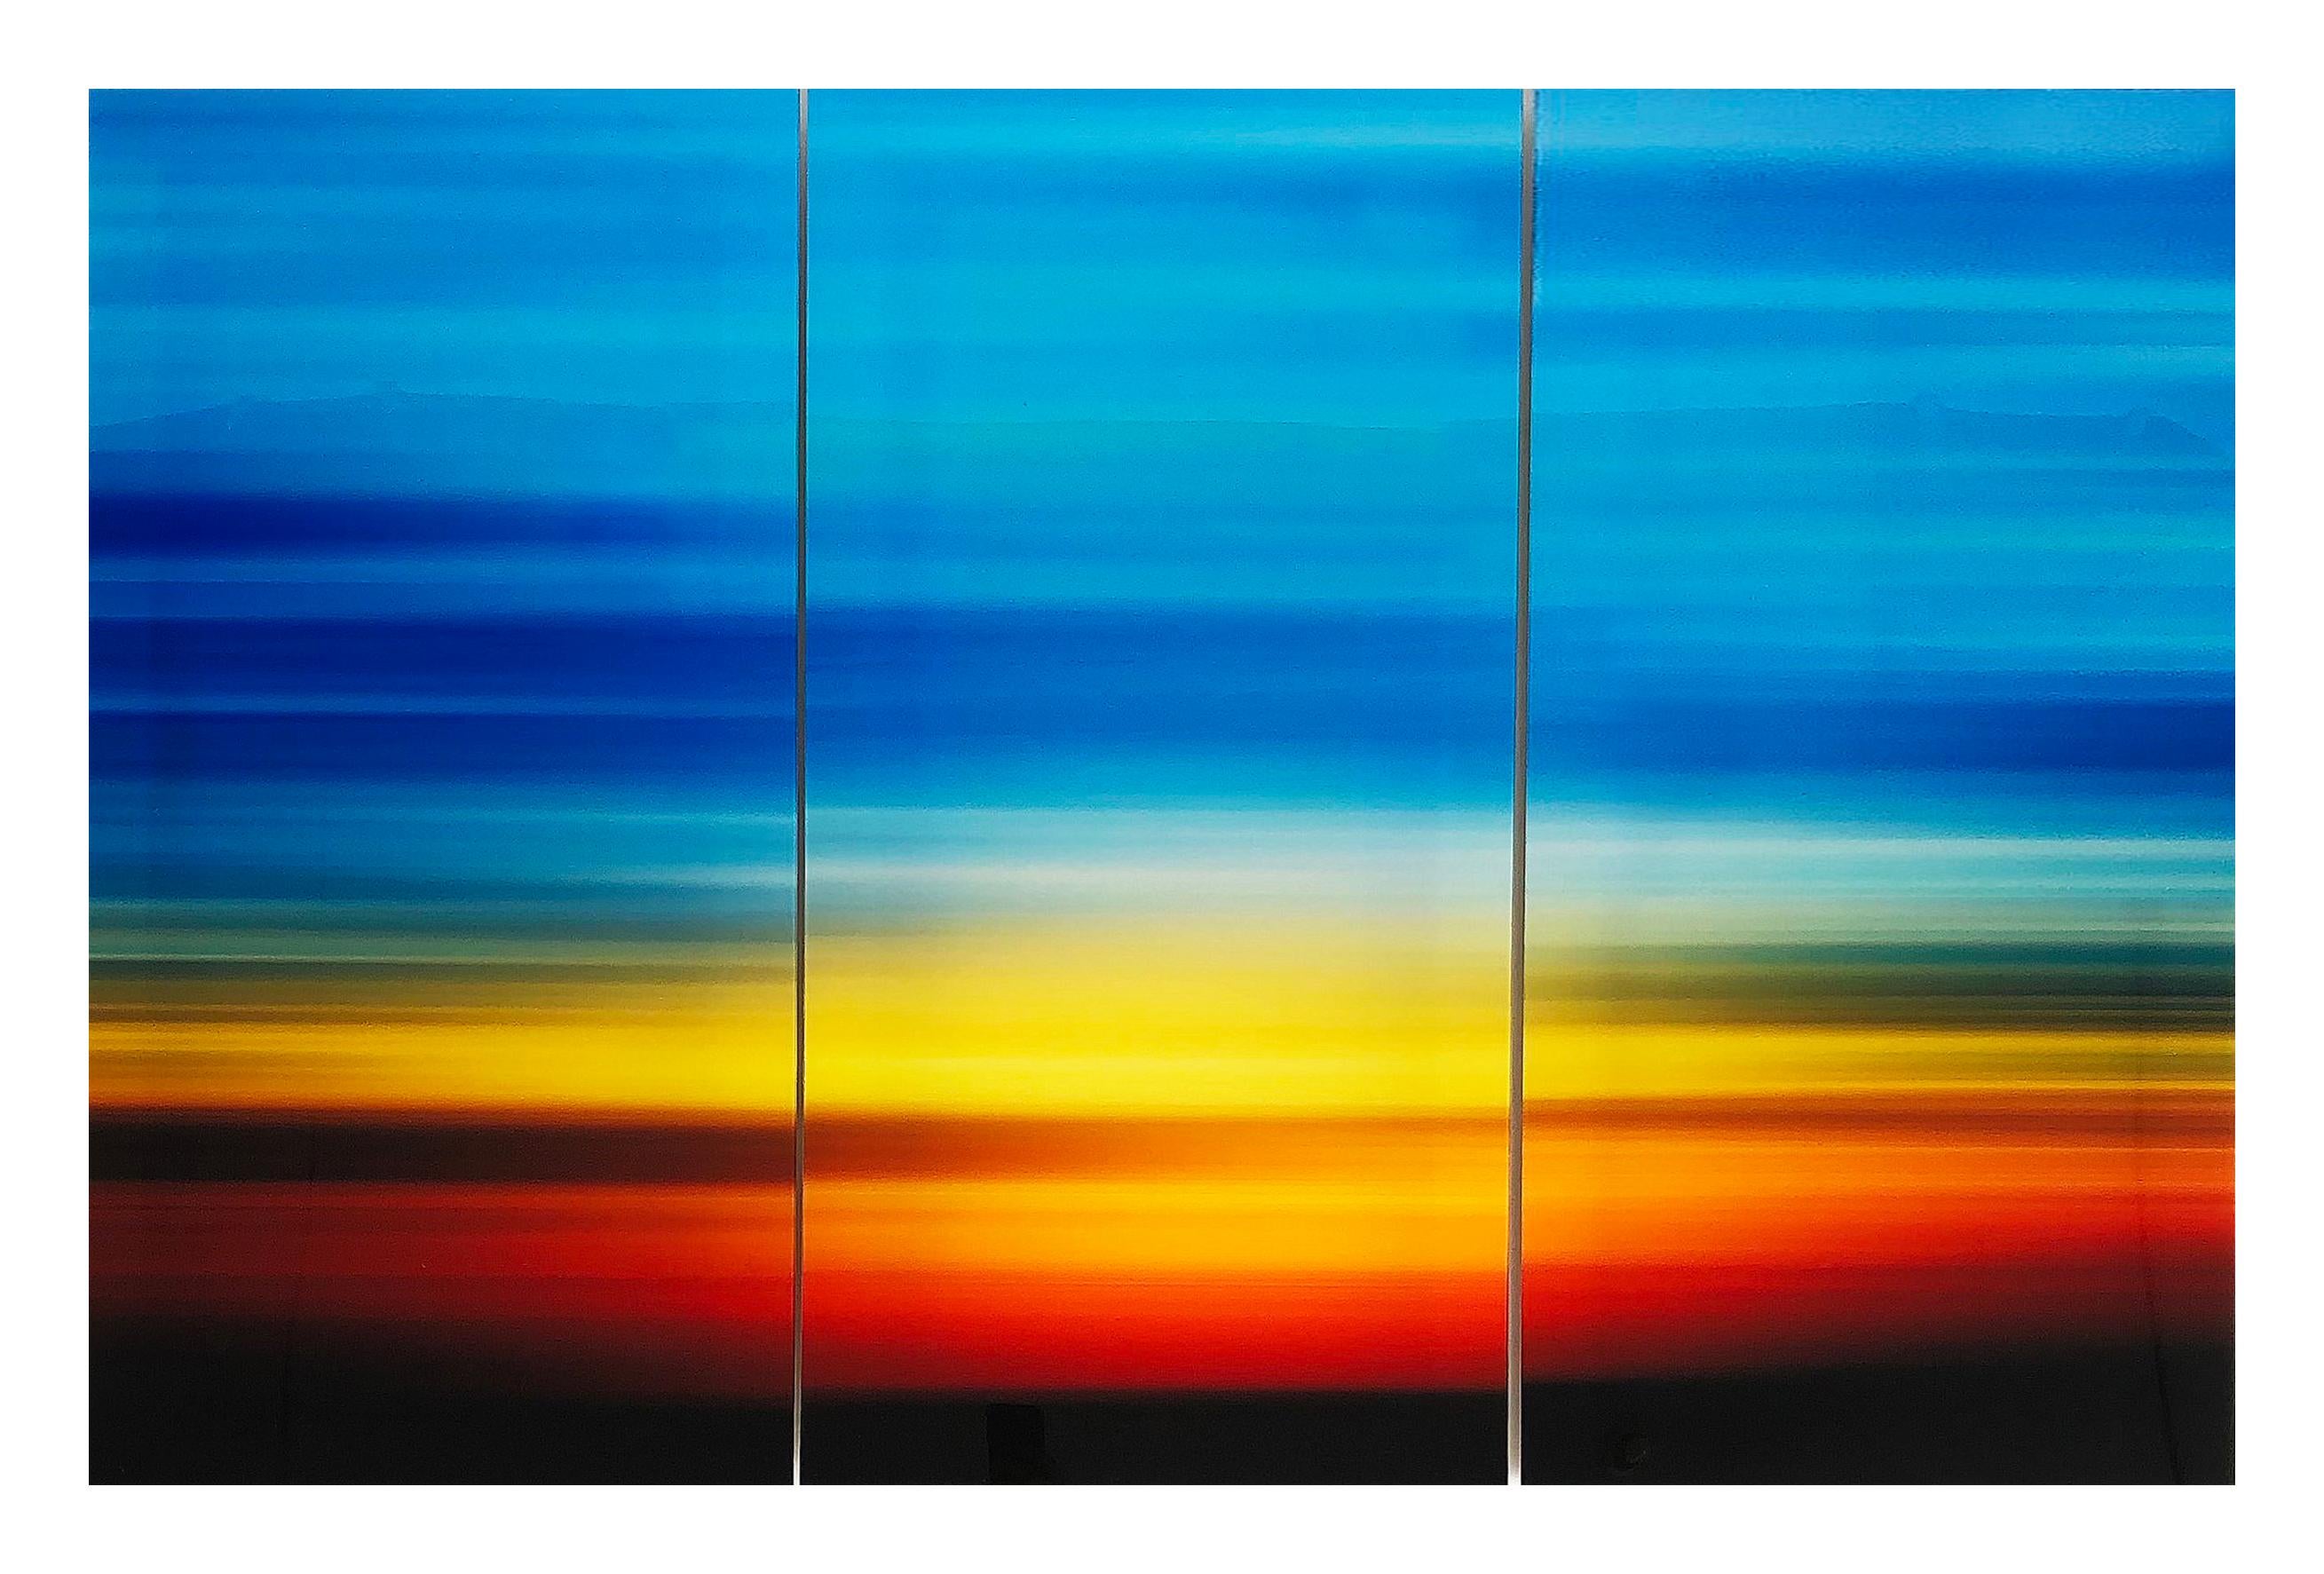 Contemporary Sunset Photographic Triptych- Set of 3

Offered for sale is an original enhanced sunset photographic triptych. The photographs are laminated in resin and supported with wood frames on verso. Each panel measures 20.12